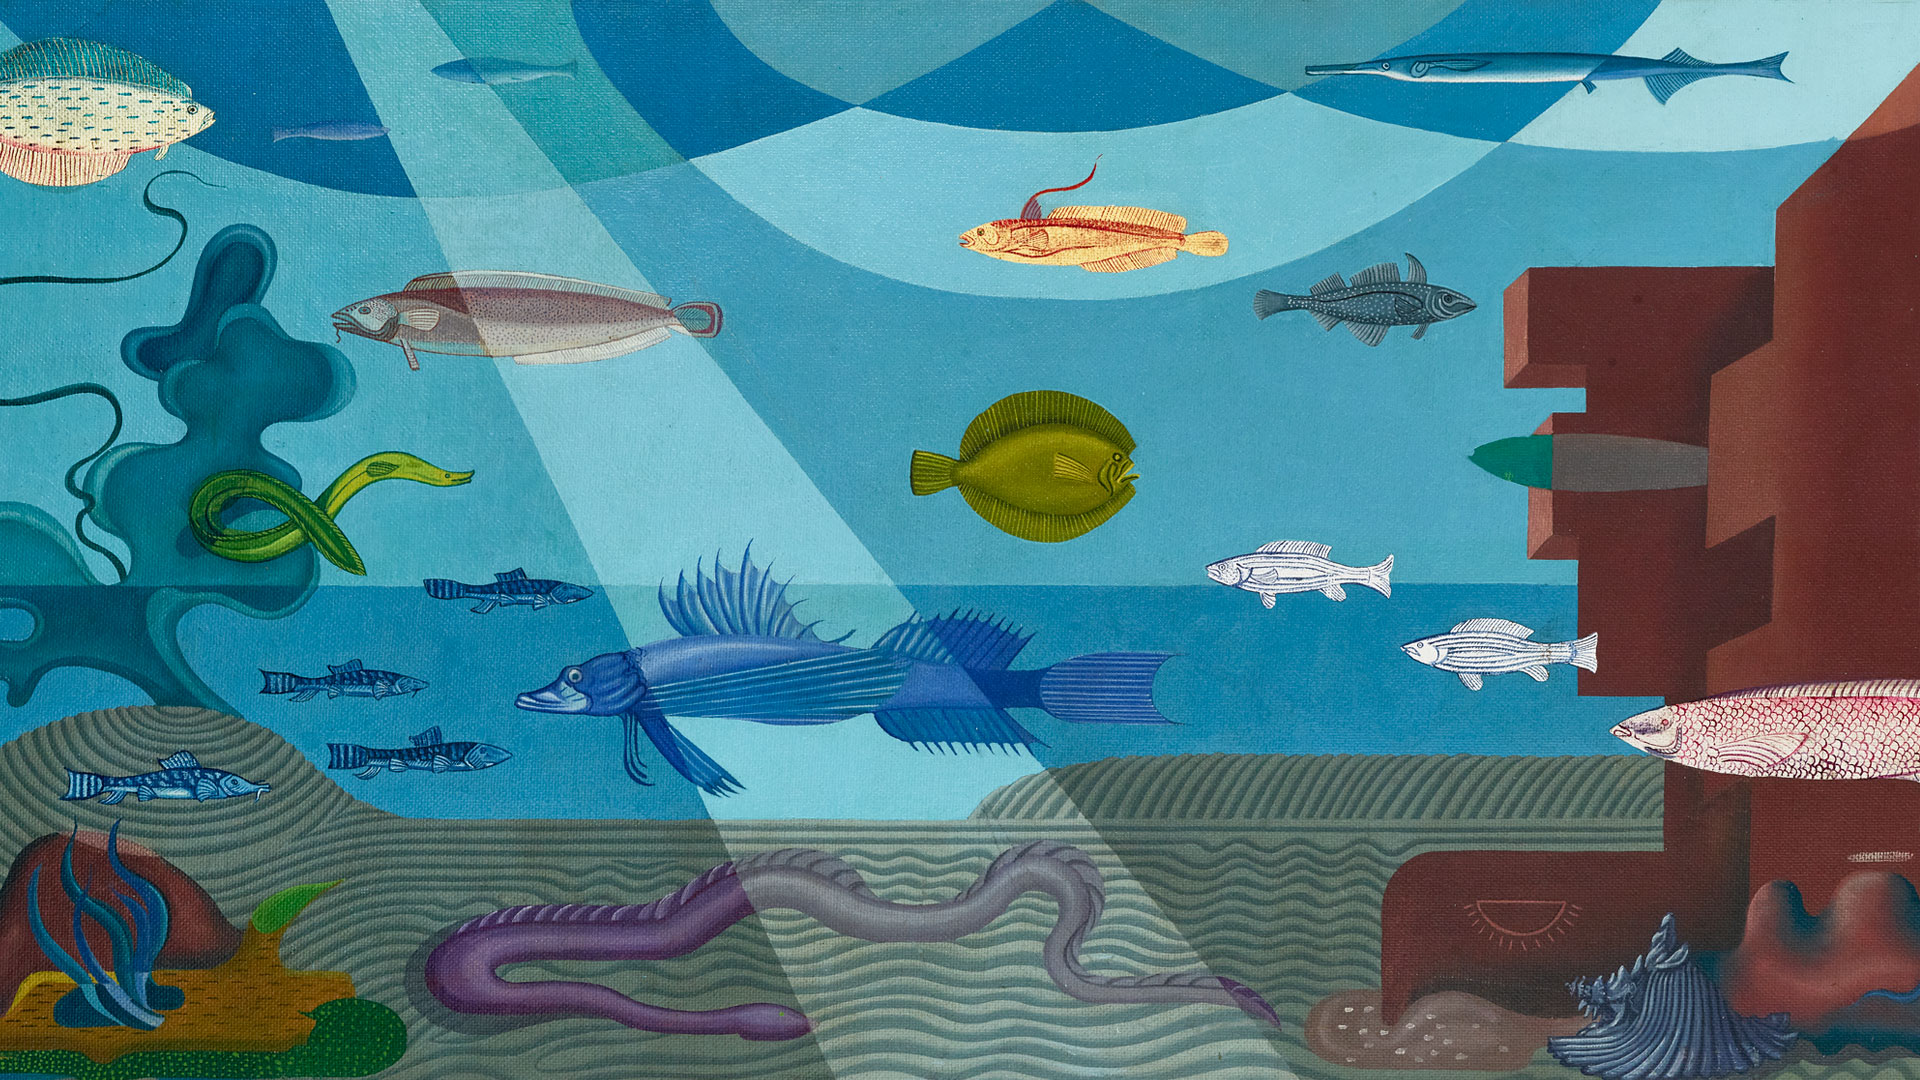 Mural study depicting an underwater environment complete with stylized ruins